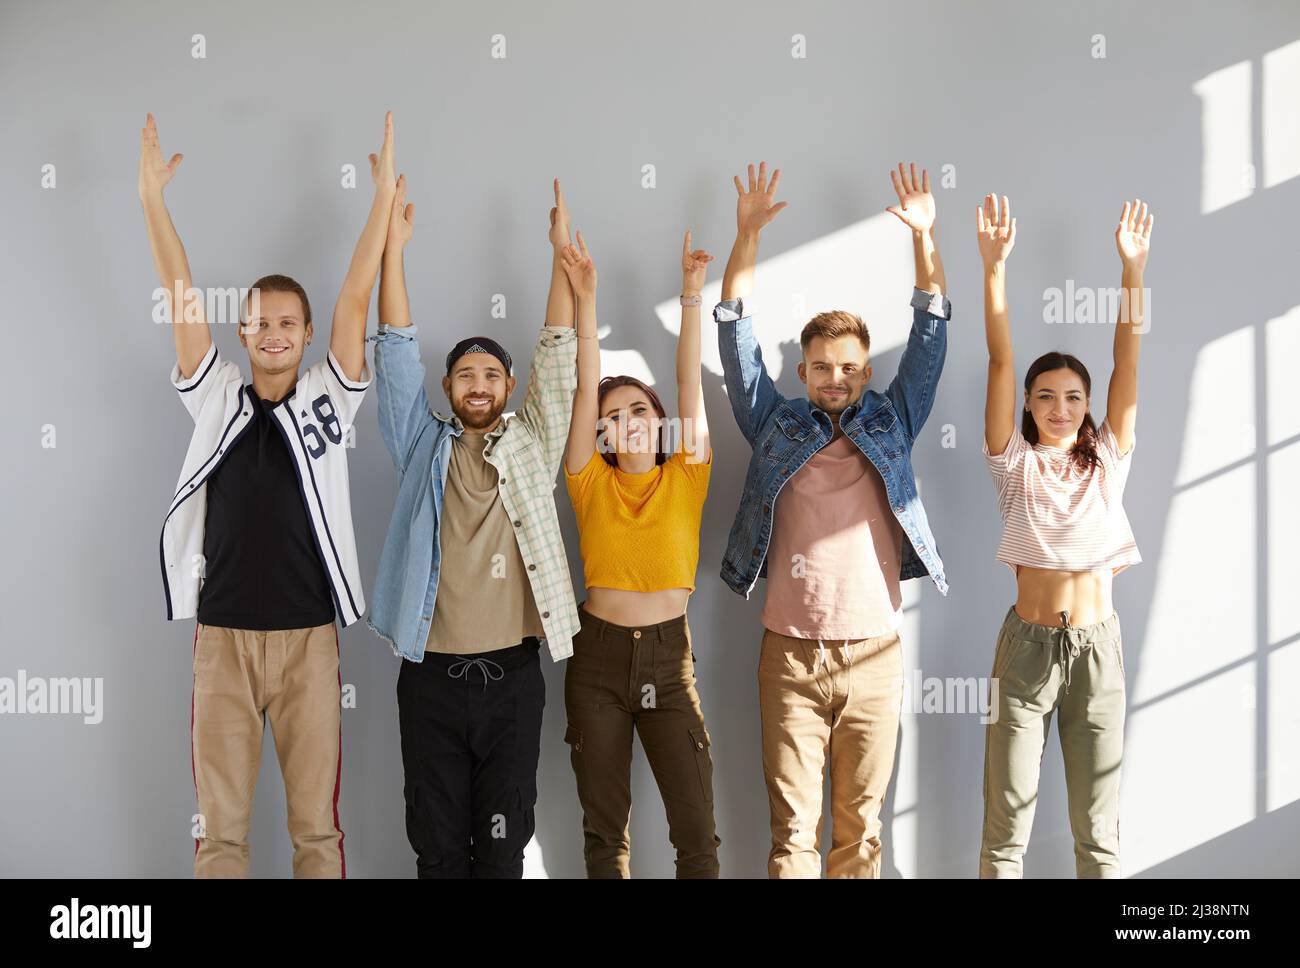 Team of cheerful young people standing together, smiling and raising their hands up Stock Photo